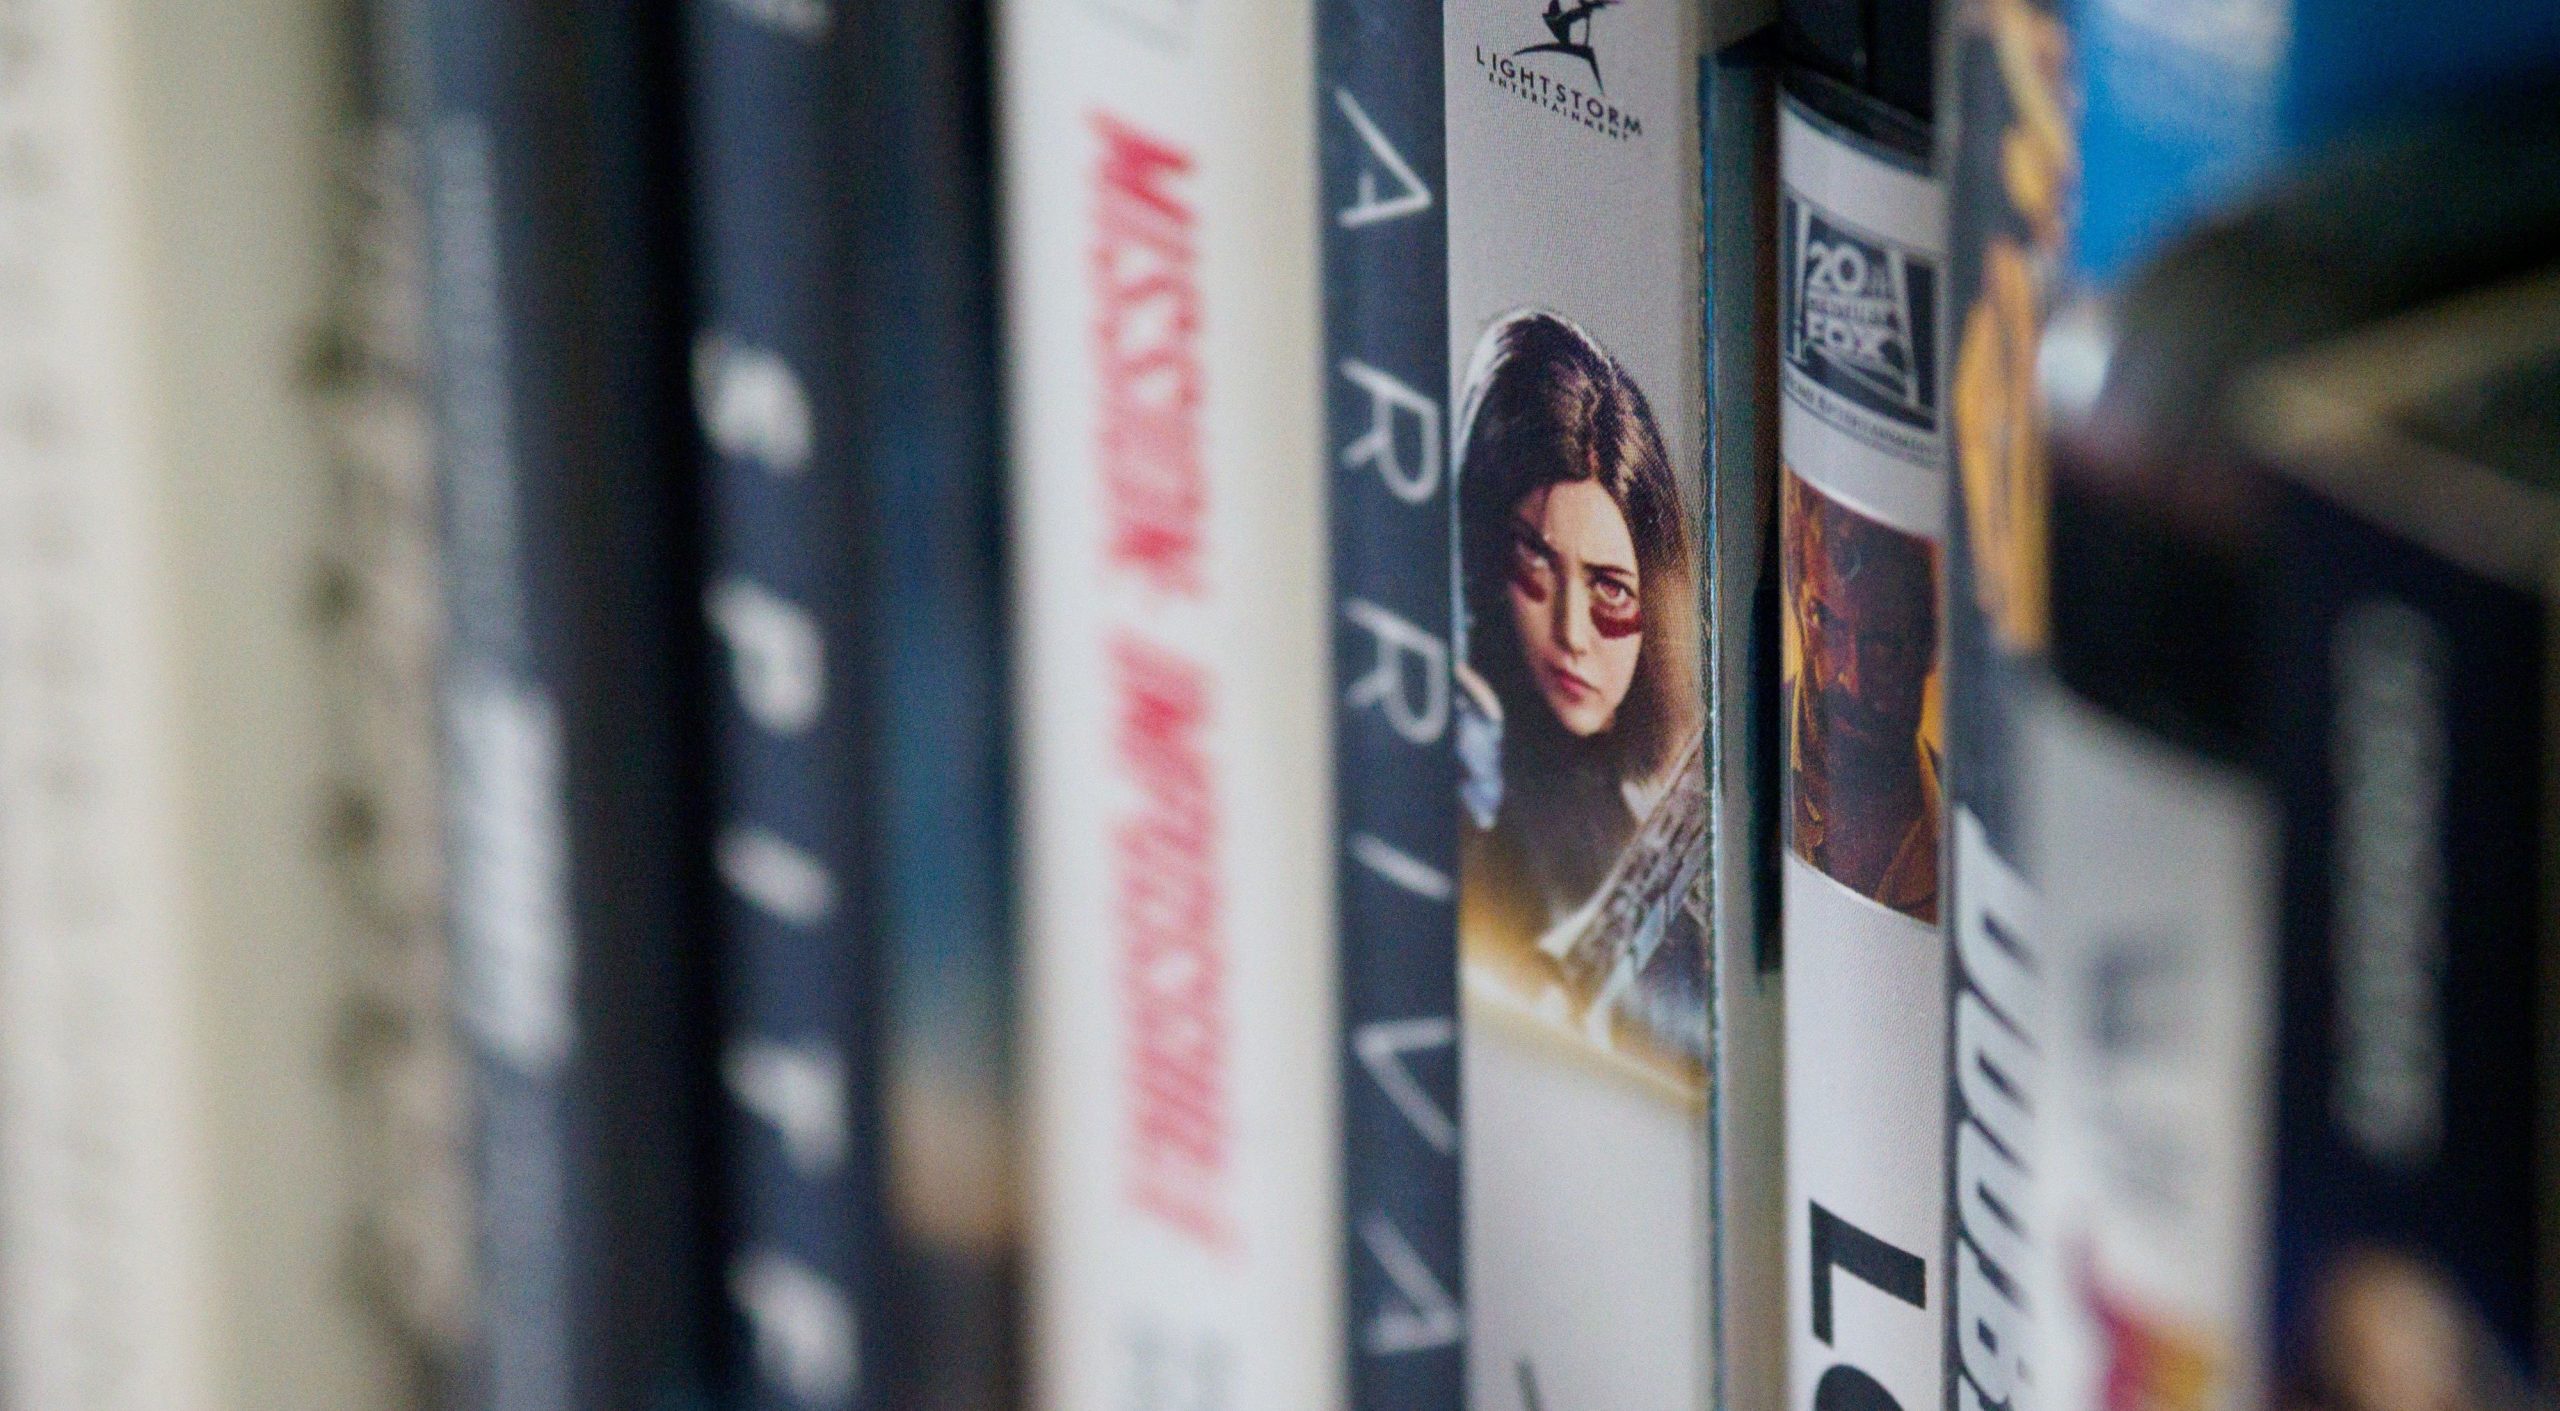 Row of DVDs up close.